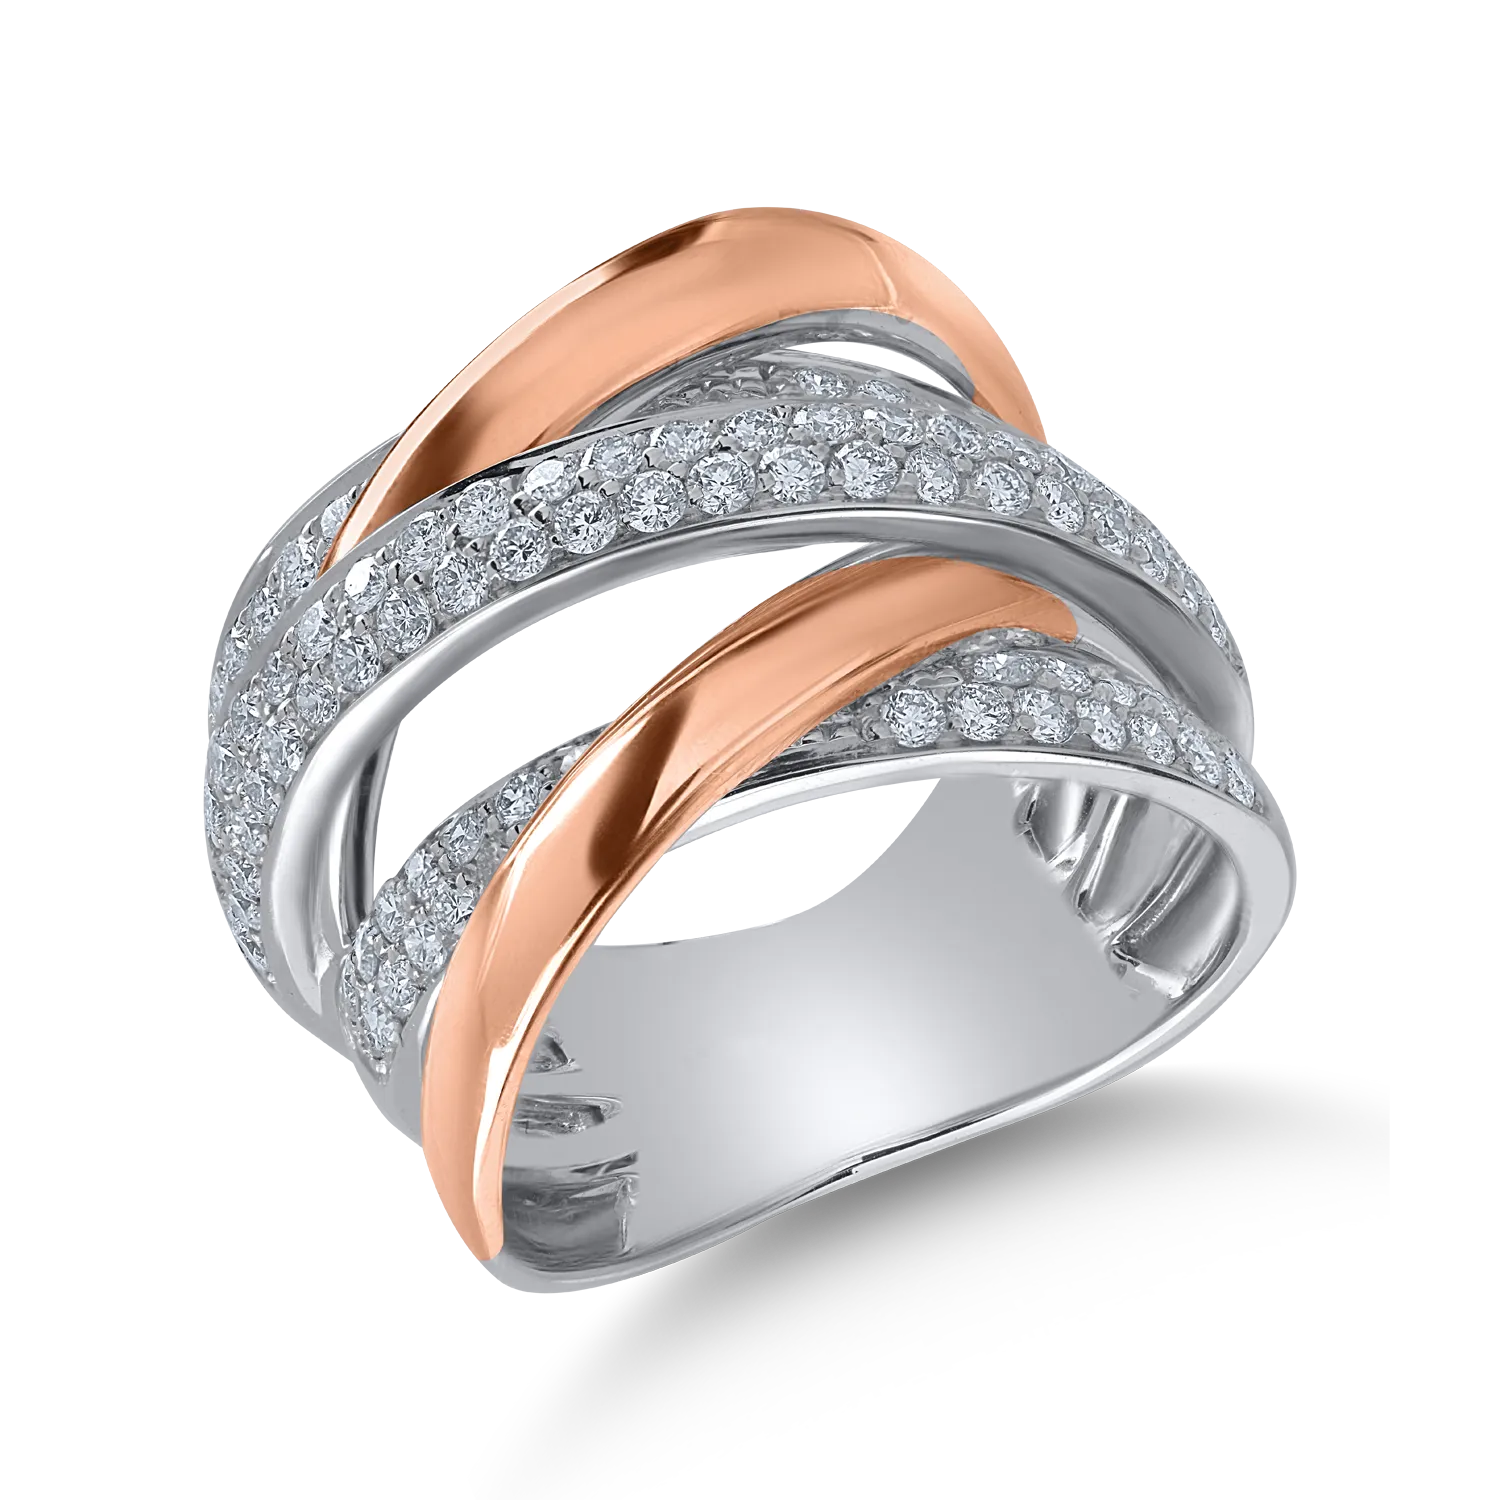 White-rose gold ring with 1.1ct diamonds